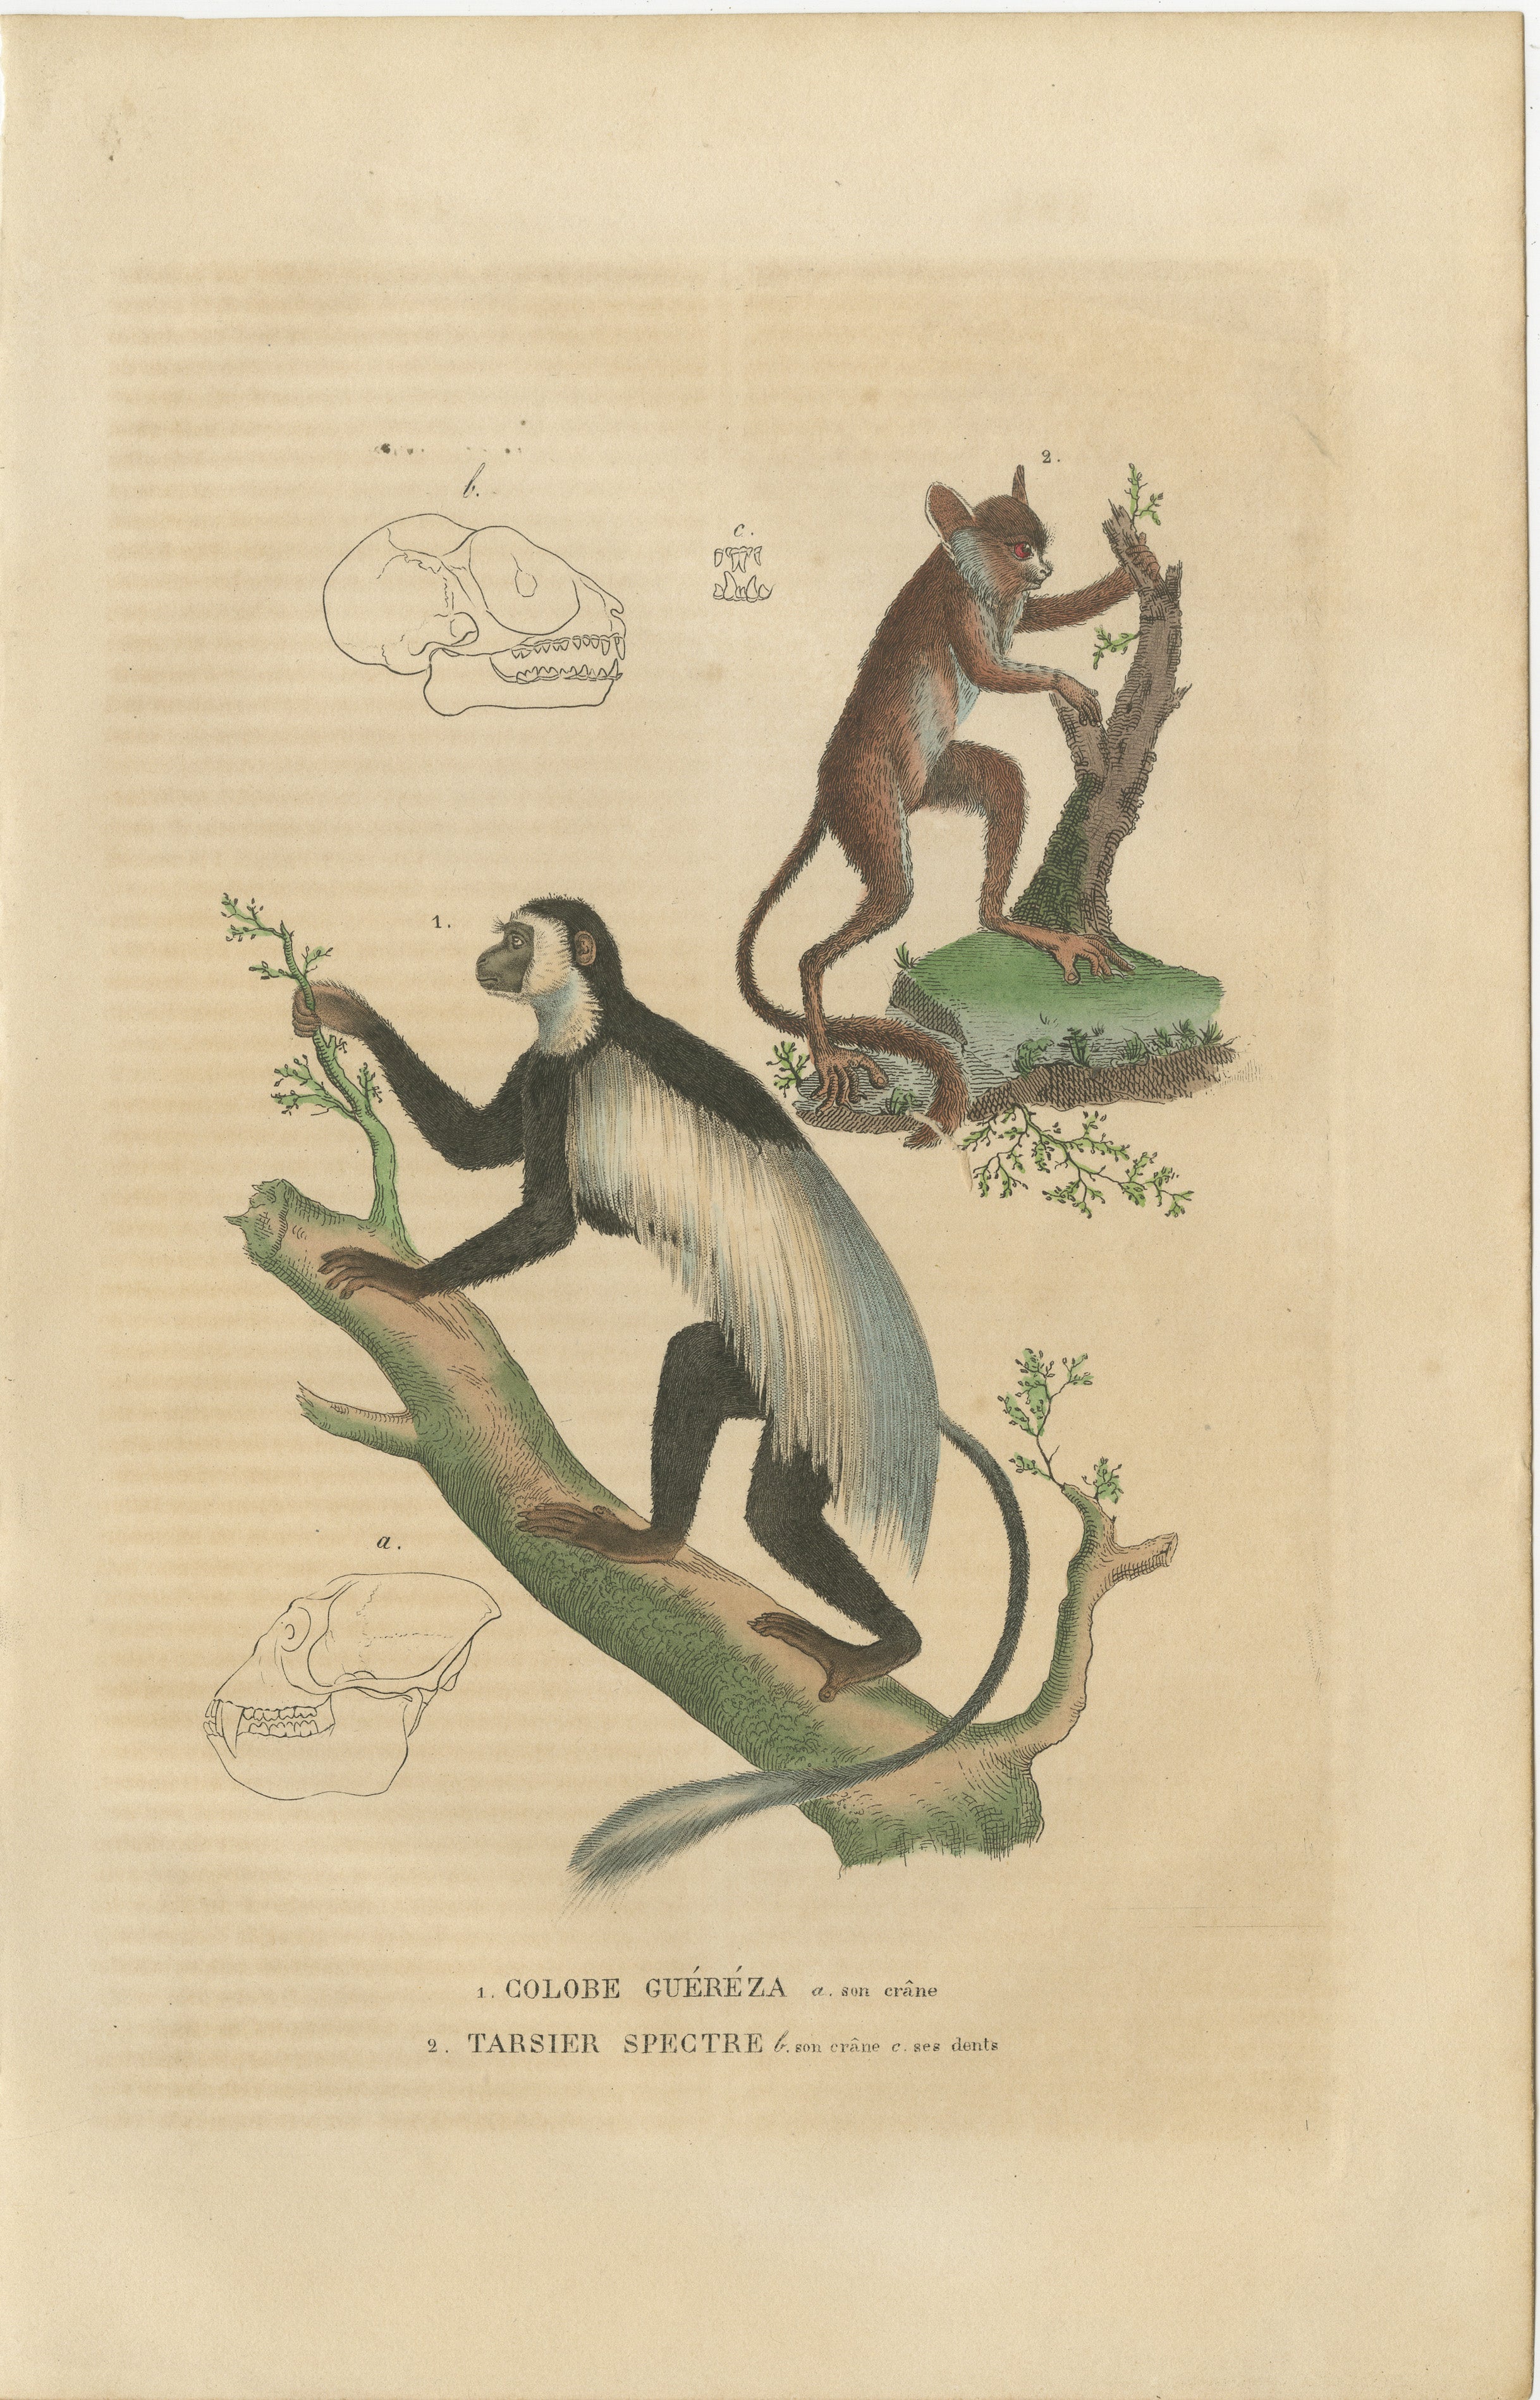 The illustration features two primates and accompanying anatomical sketches of their skulls, indicating a level of scientific study:

1. **Colobe Guéréza** - This is the Guereza, also known as the Eastern black-and-white colobus. It is notable for